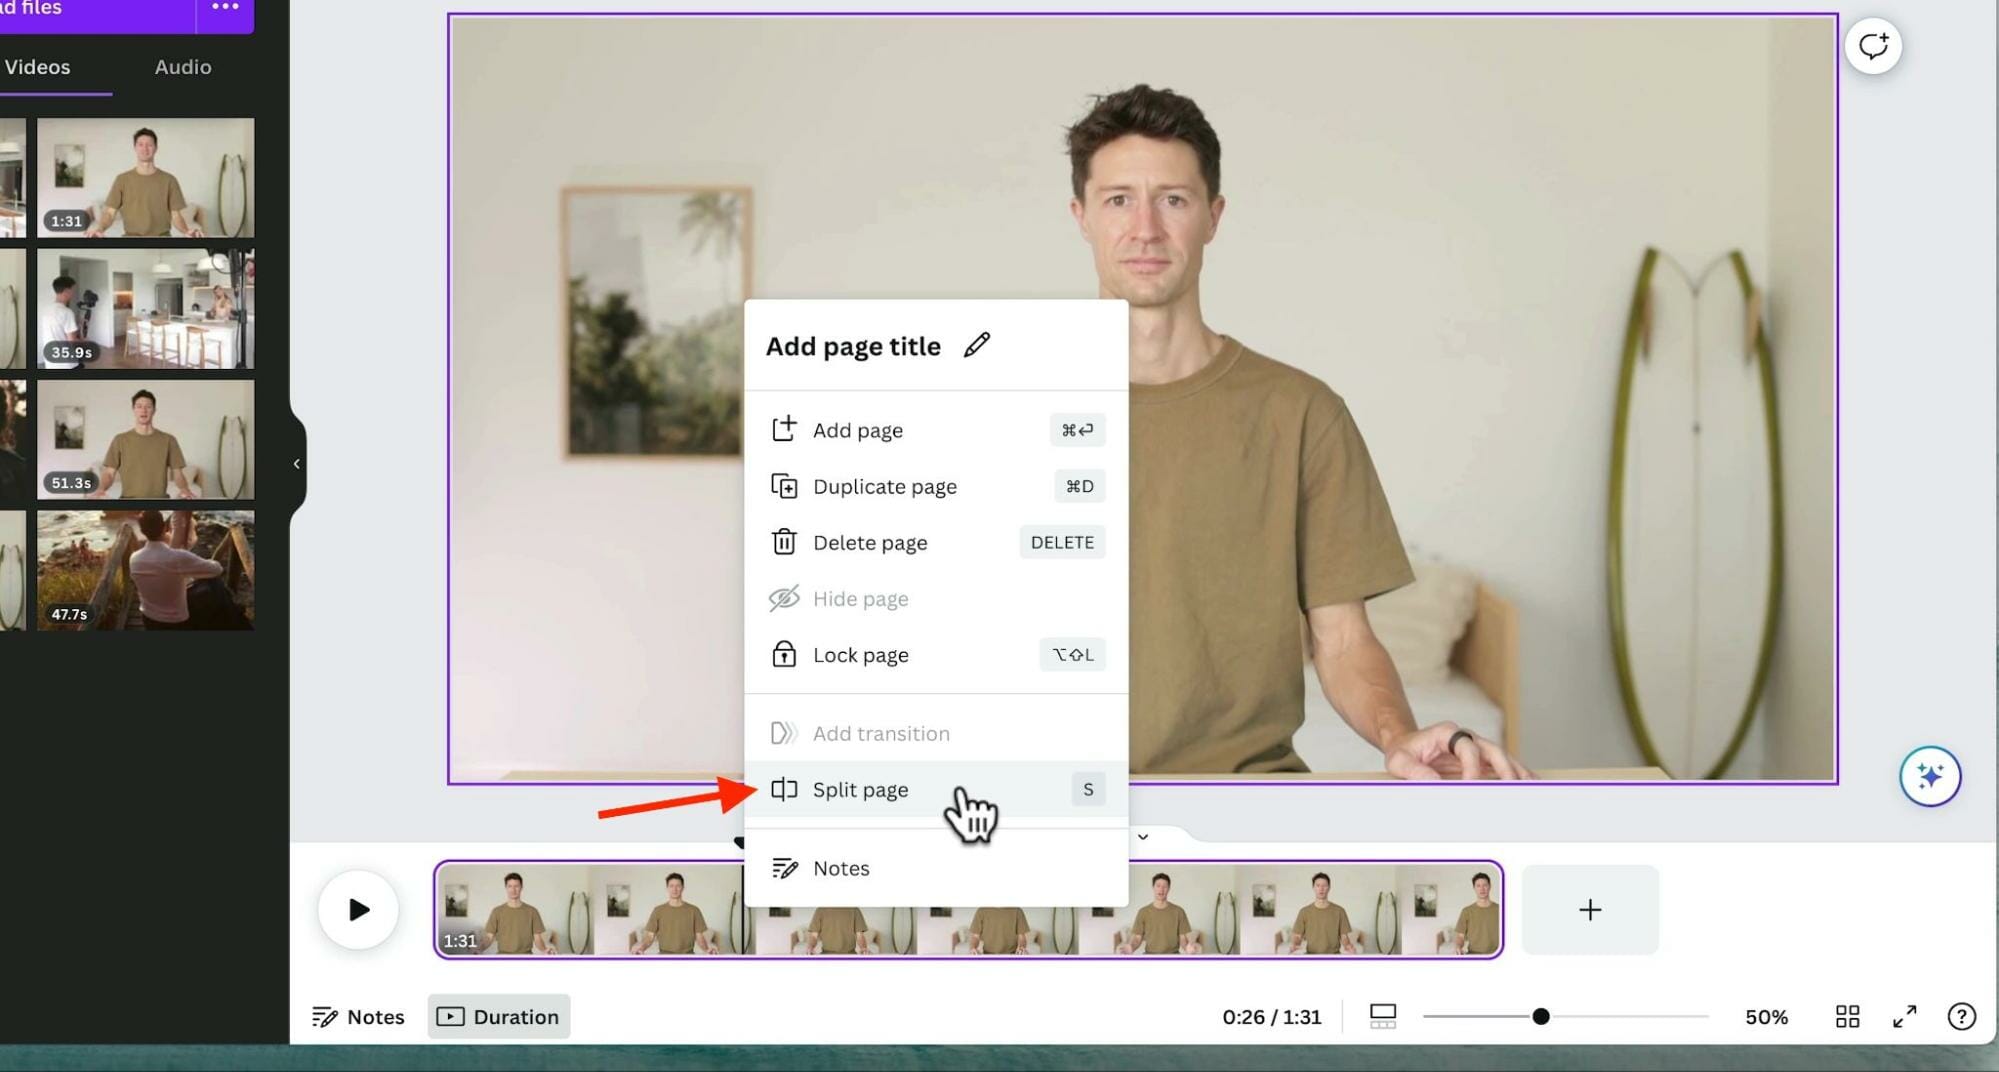 Tool options after right-clicking on the video timeline with Split page highlighted